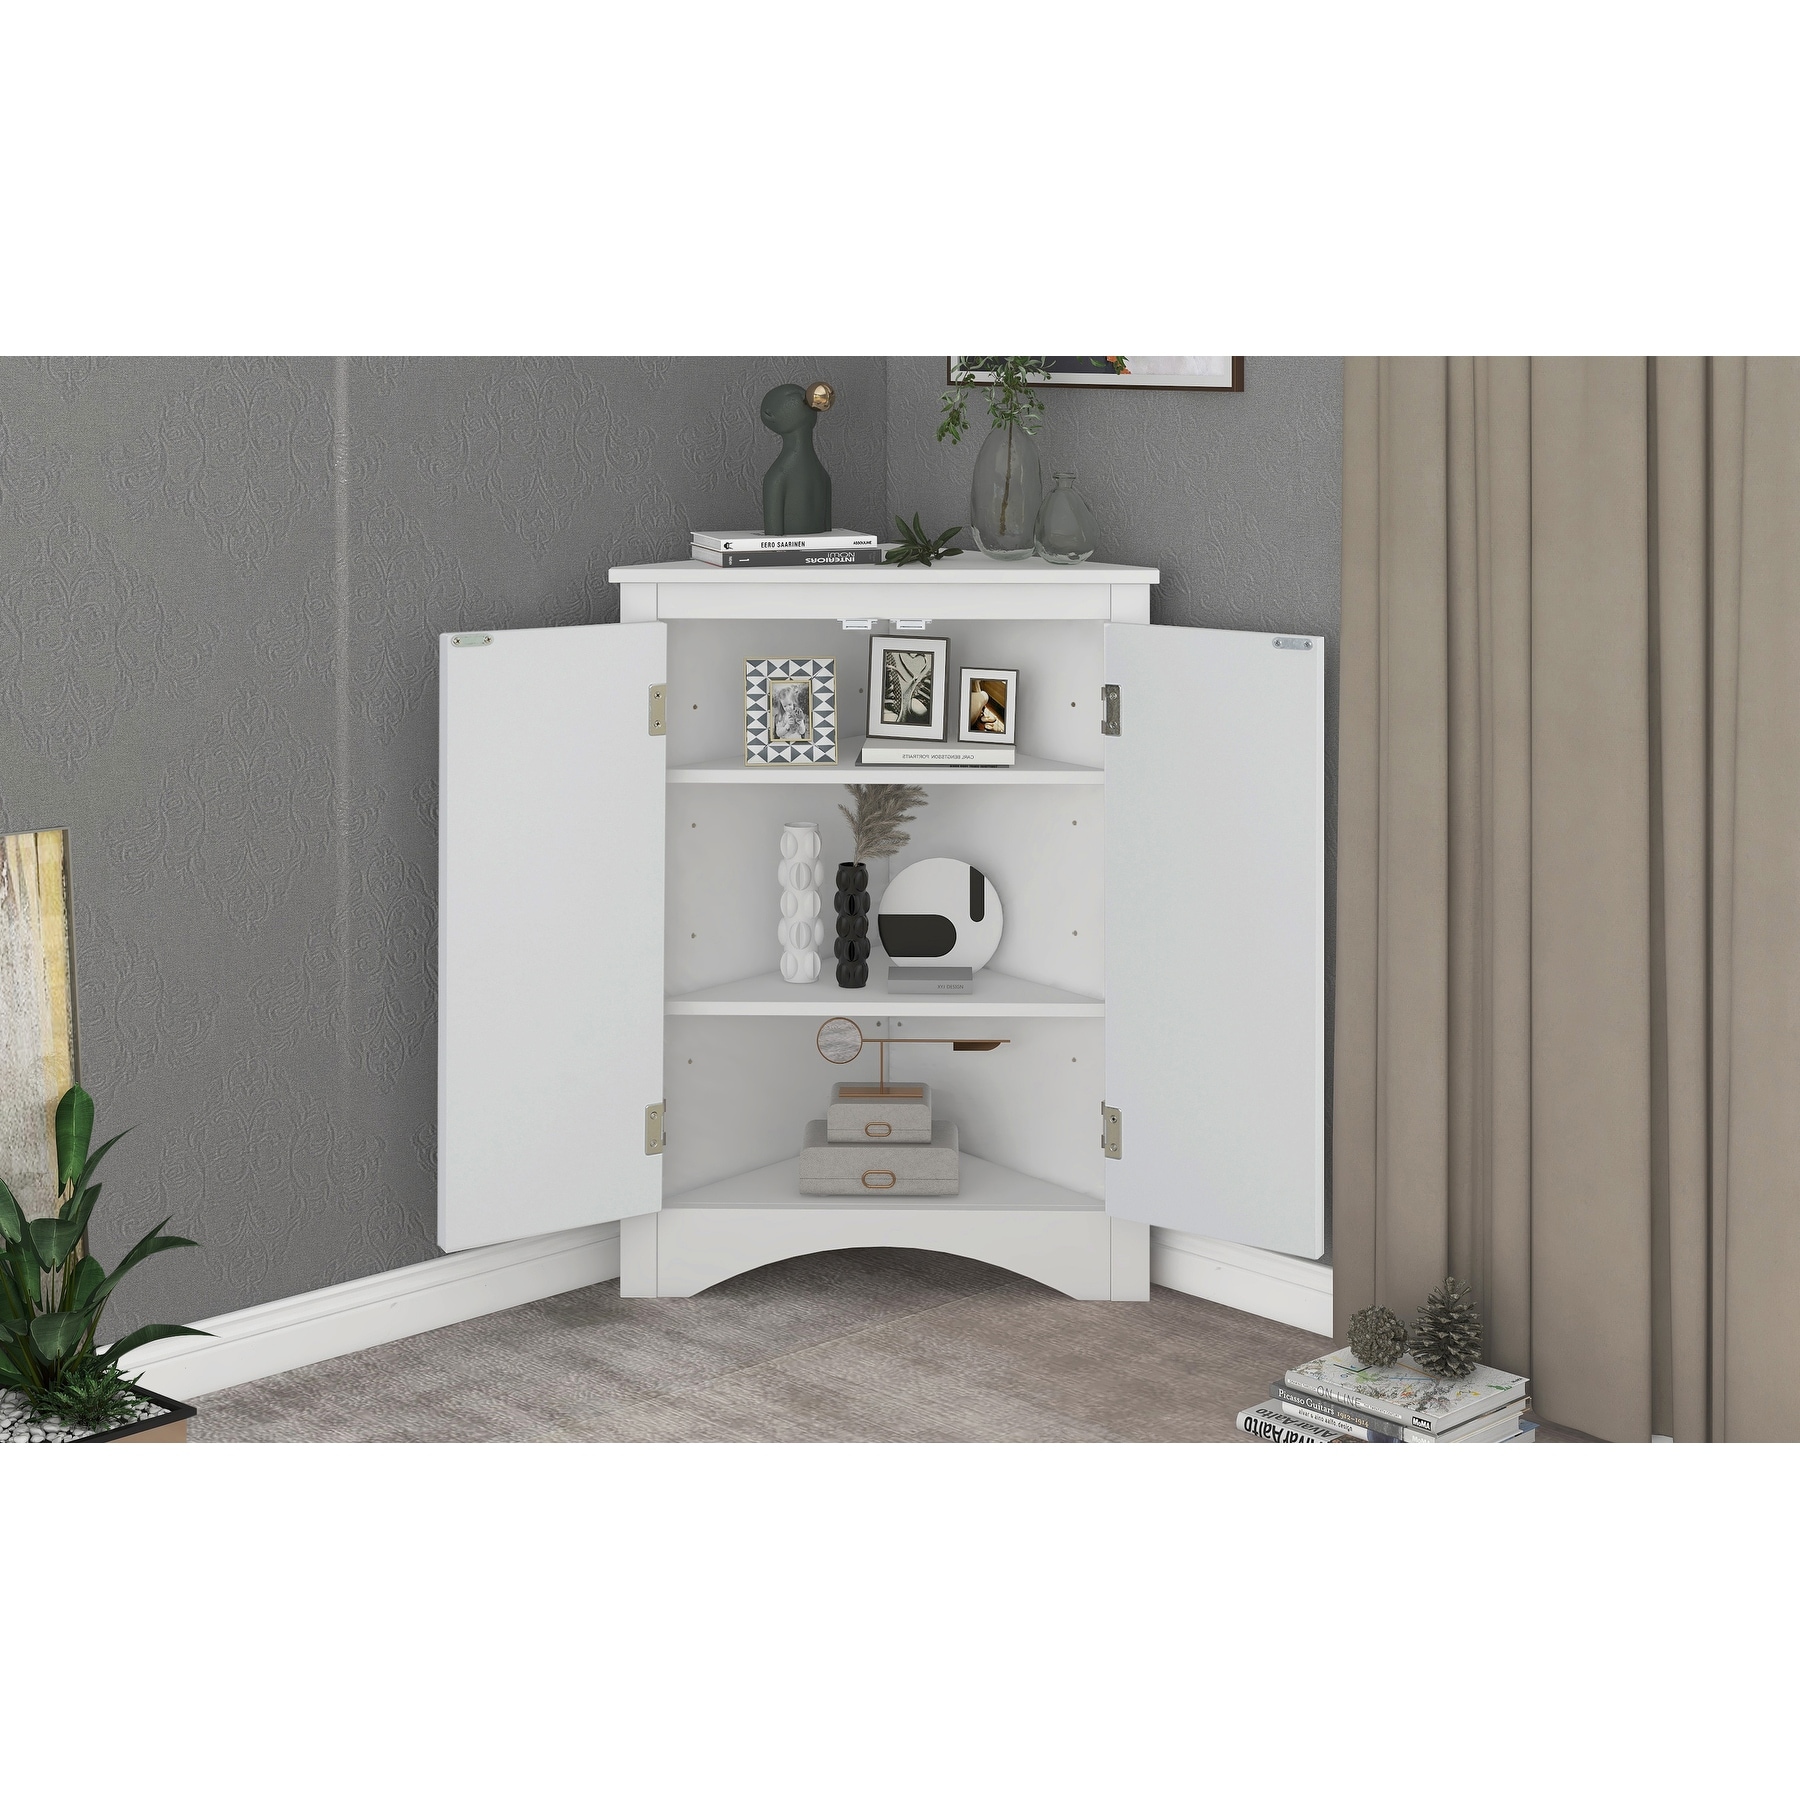 17.20 in. Triangle Freestanding Floor Cabinet Bathroom Storage Cabinet with  Adjustable Shelves,White